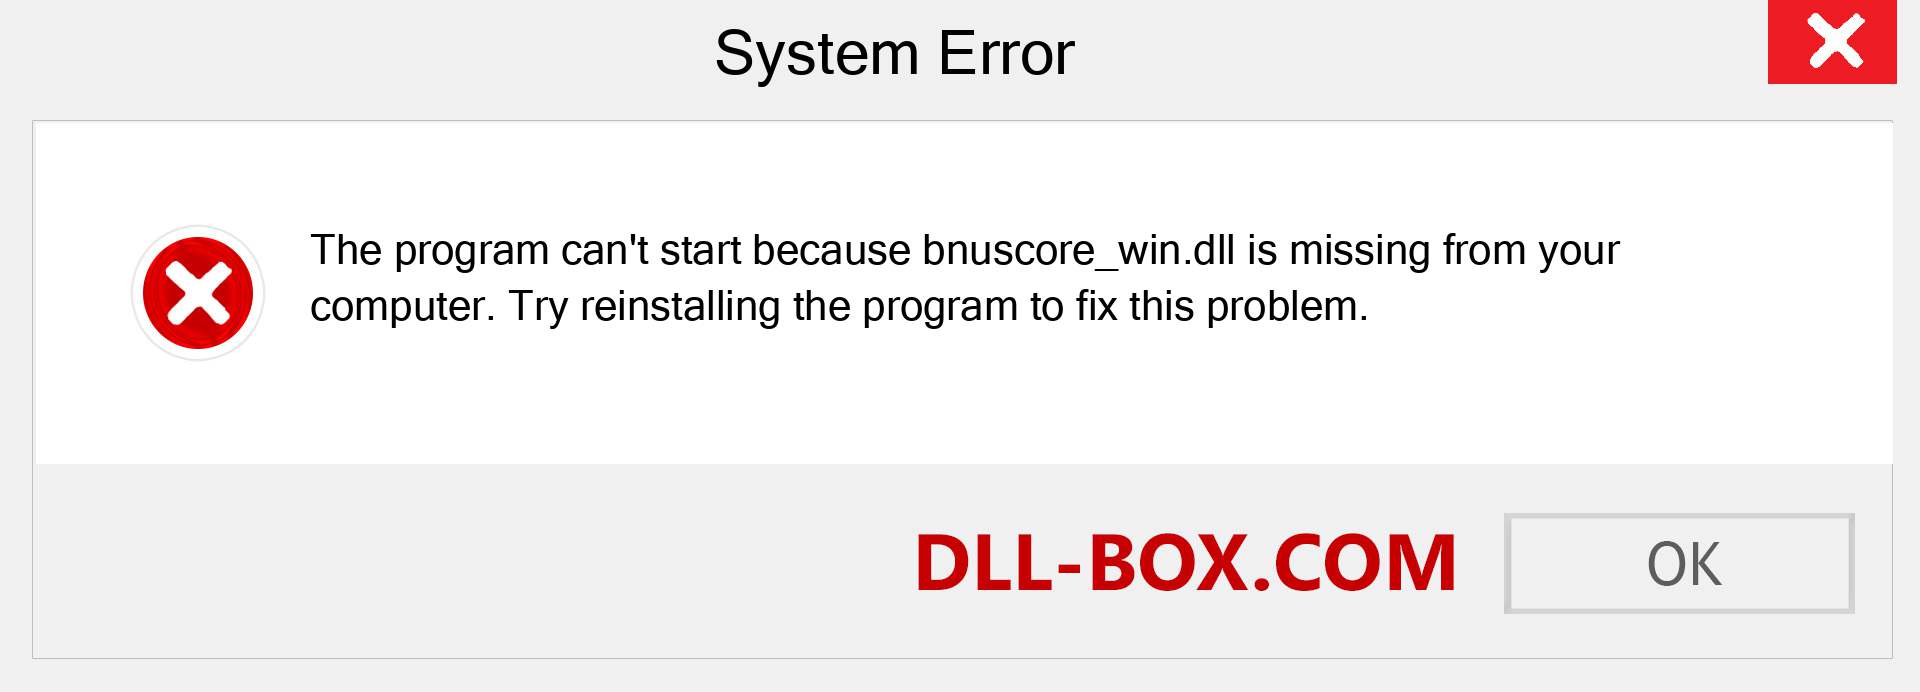  bnuscore_win.dll file is missing?. Download for Windows 7, 8, 10 - Fix  bnuscore_win dll Missing Error on Windows, photos, images